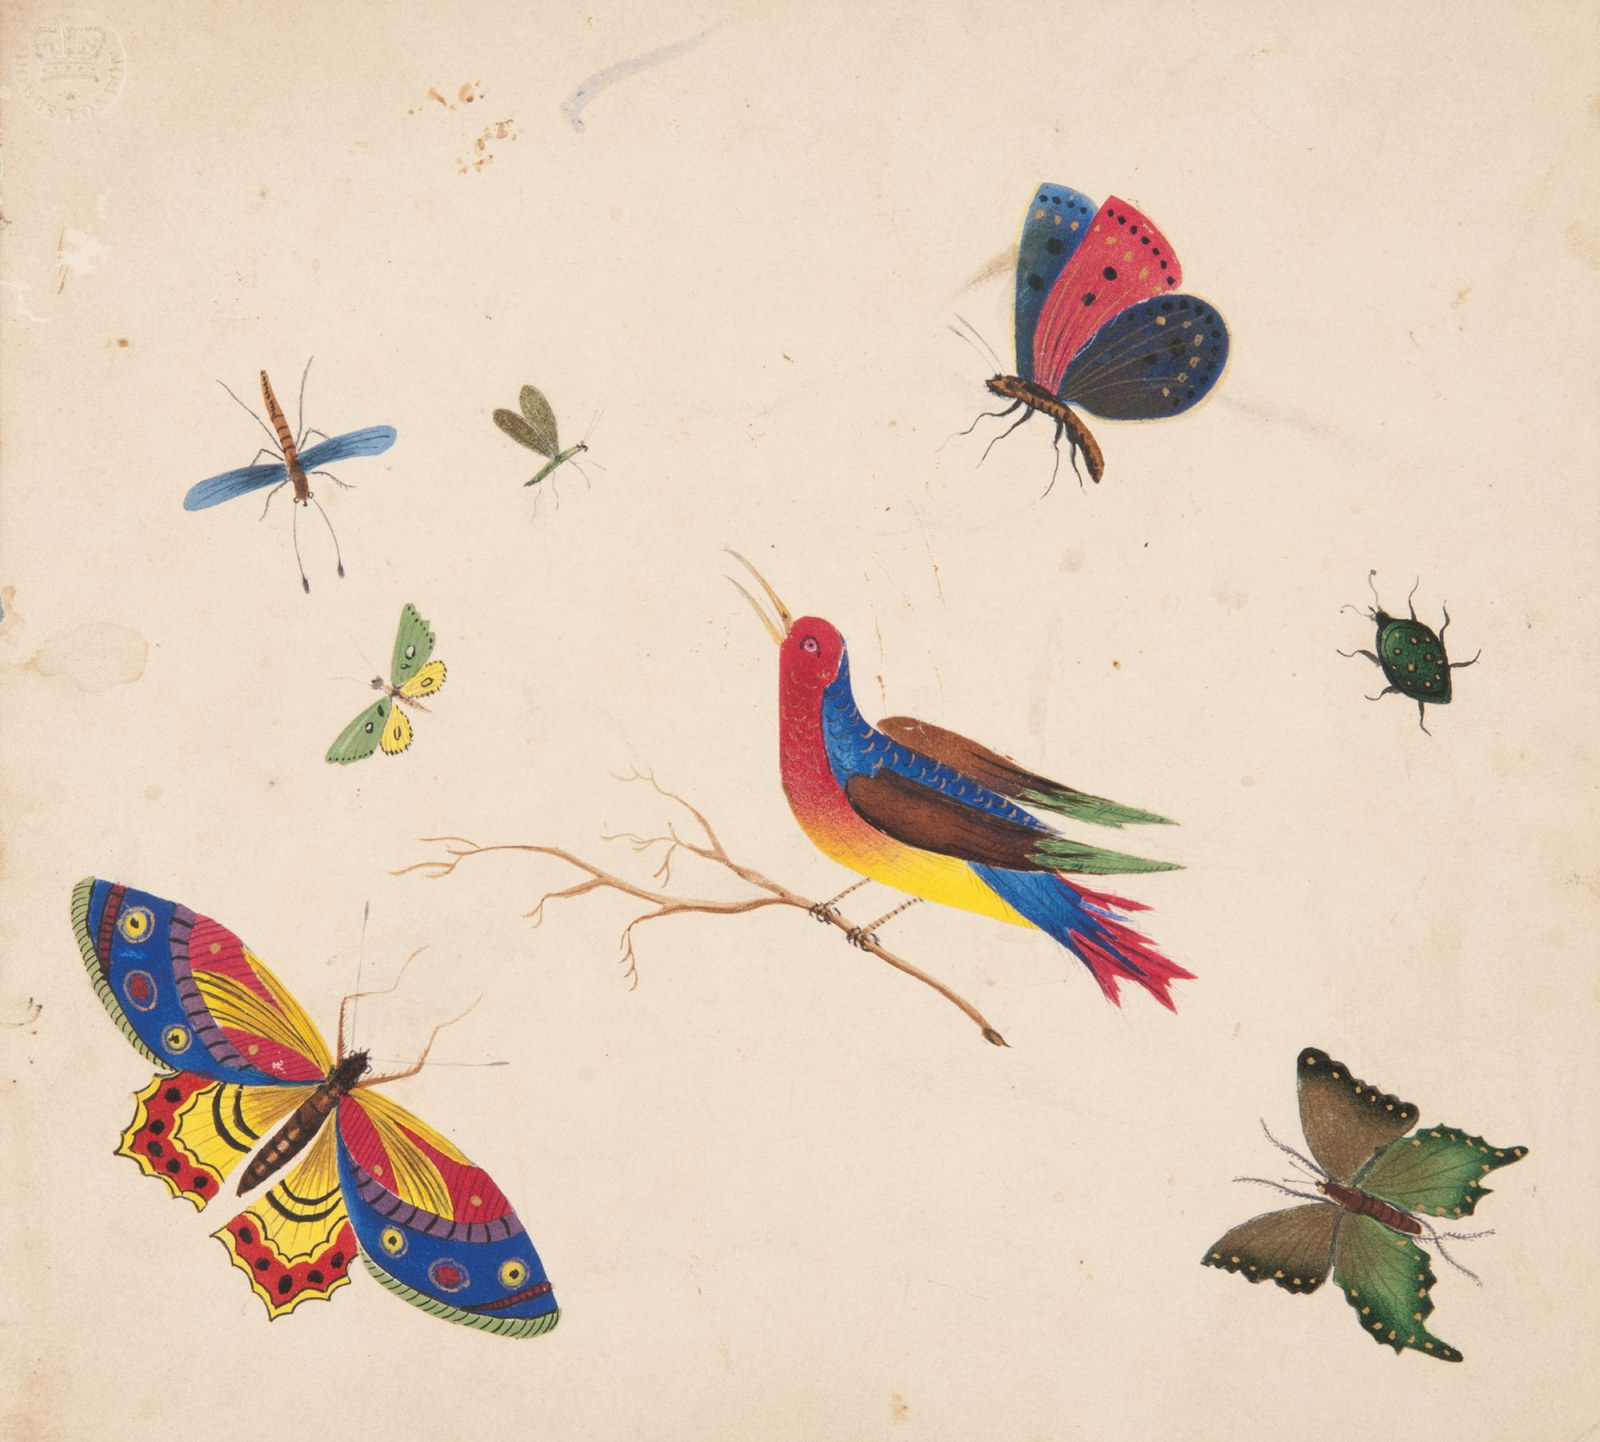 Bird and insects: theorem or poonah painting, attributed to Sarah Ann Jones, Sydney, 1840s